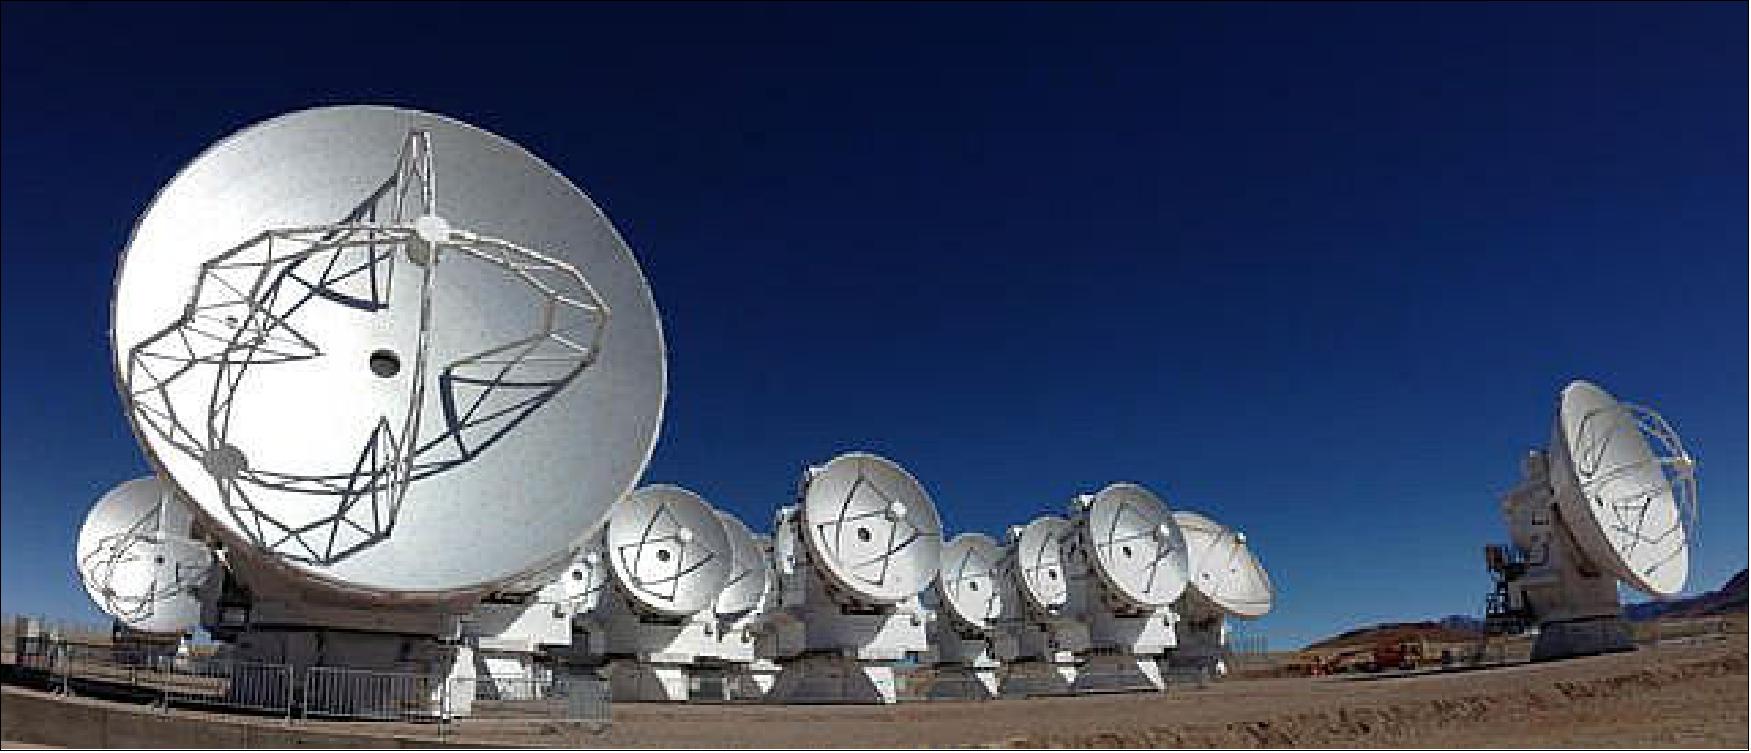 Figure 6: The 12th 7 m antenna developed by Japan was delivered to the high site in Chajnantor on April 29, 2013. Now all the 16 antennas of the ACA (Atacama Compact Array) are installed at the Array Operations Site at an altitude of 5,000 m, waiting to unveil secrets of the universe (image credit: ALMA partnership) 16)